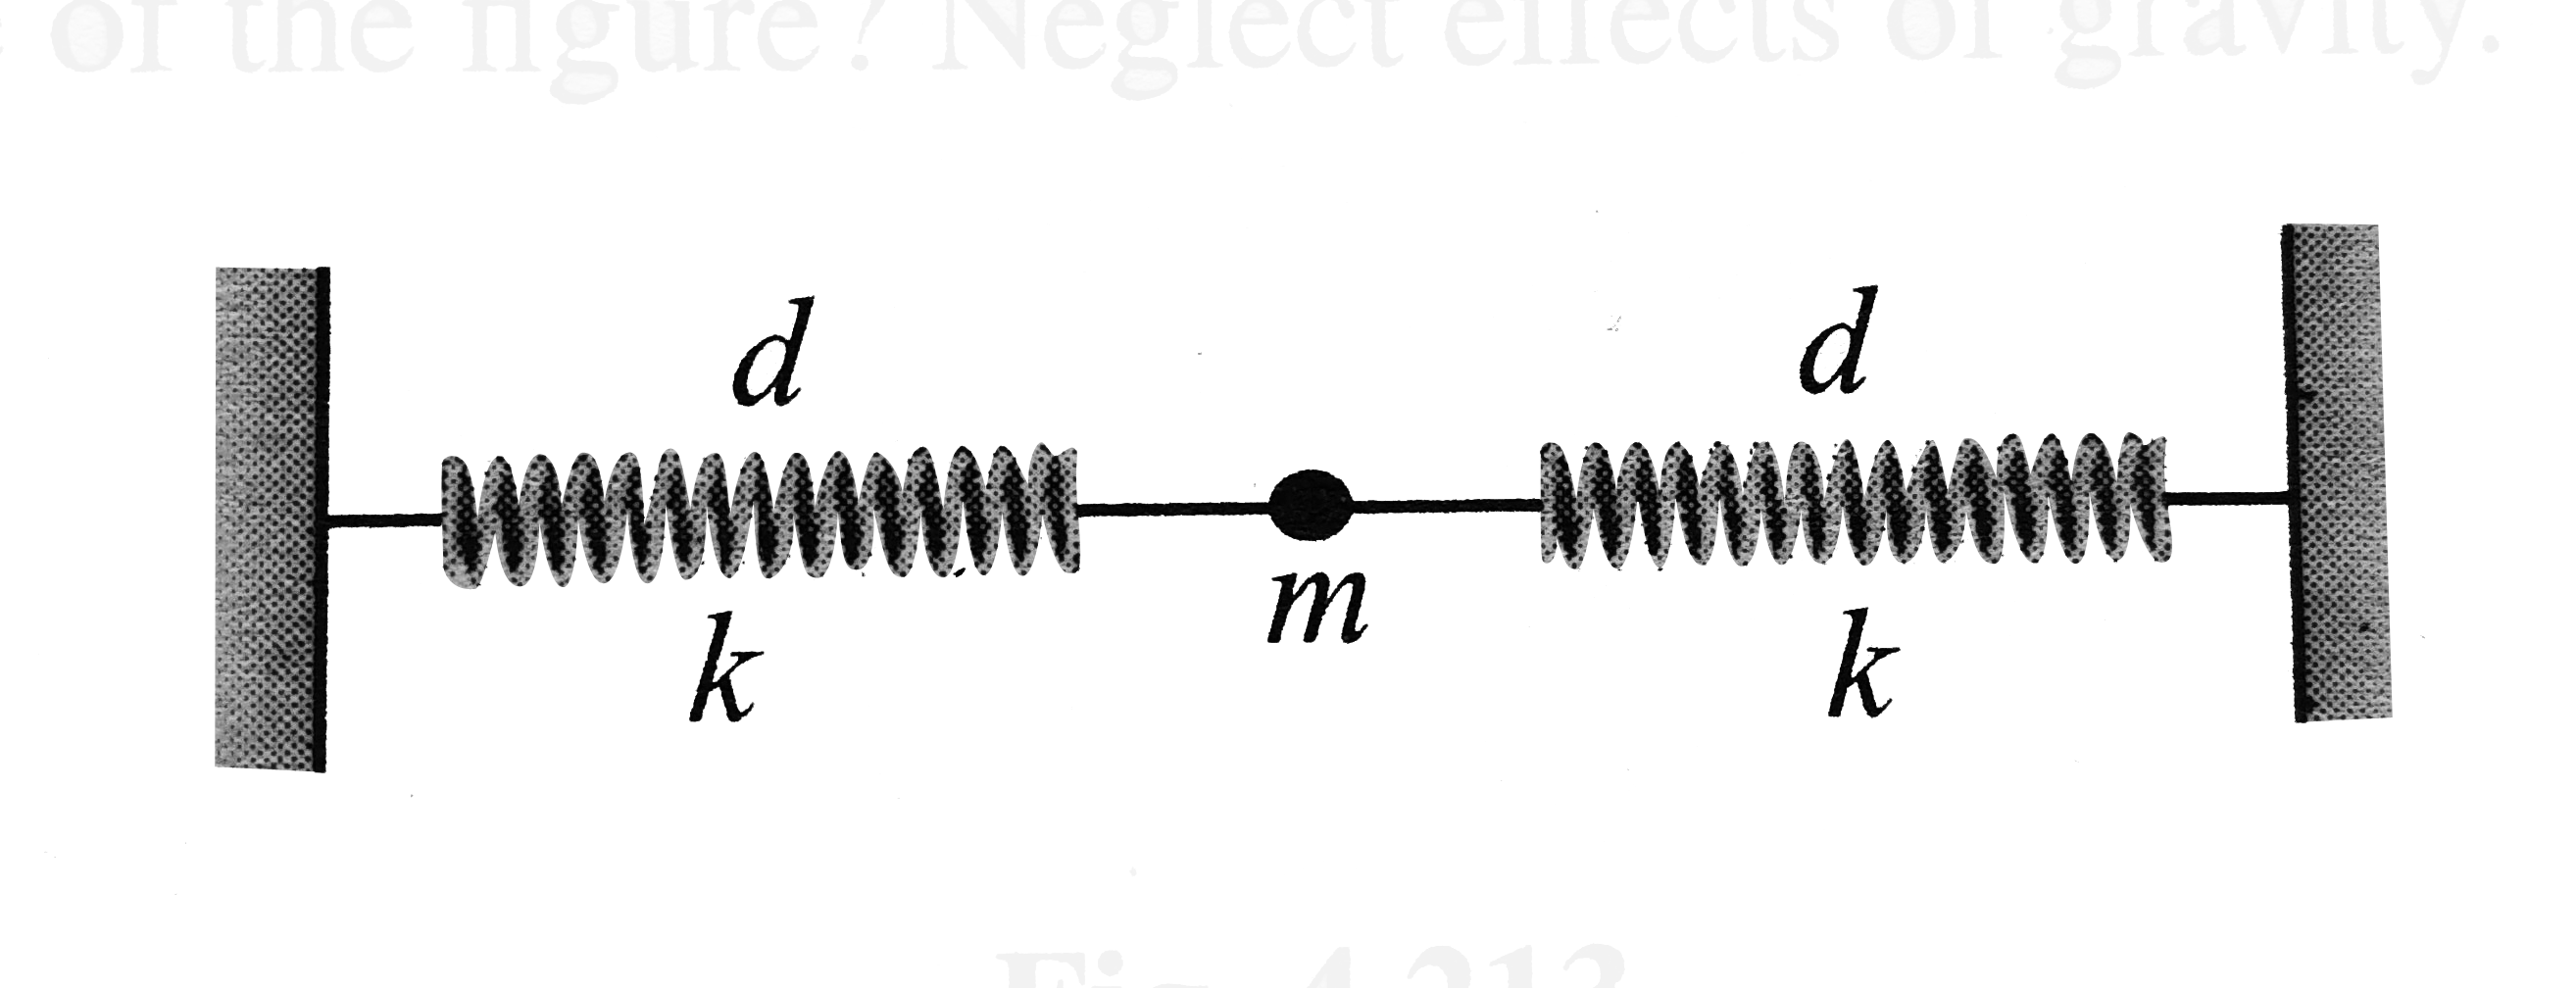 A small body of mass m is connected to two horizontal spring of elastic constant k, natural length (3d)/(4). In the equilibrium position botgh springs are stretched to length d, as shown in Fig. What will be the ratio of perod of the motion ((Tb)/(Ta)) If the body is displaced horizontally by a small distance where Ta is the time period when the particle owscillates along the line of spring Tb is time plane of the figure? Neglect effect of gravity.